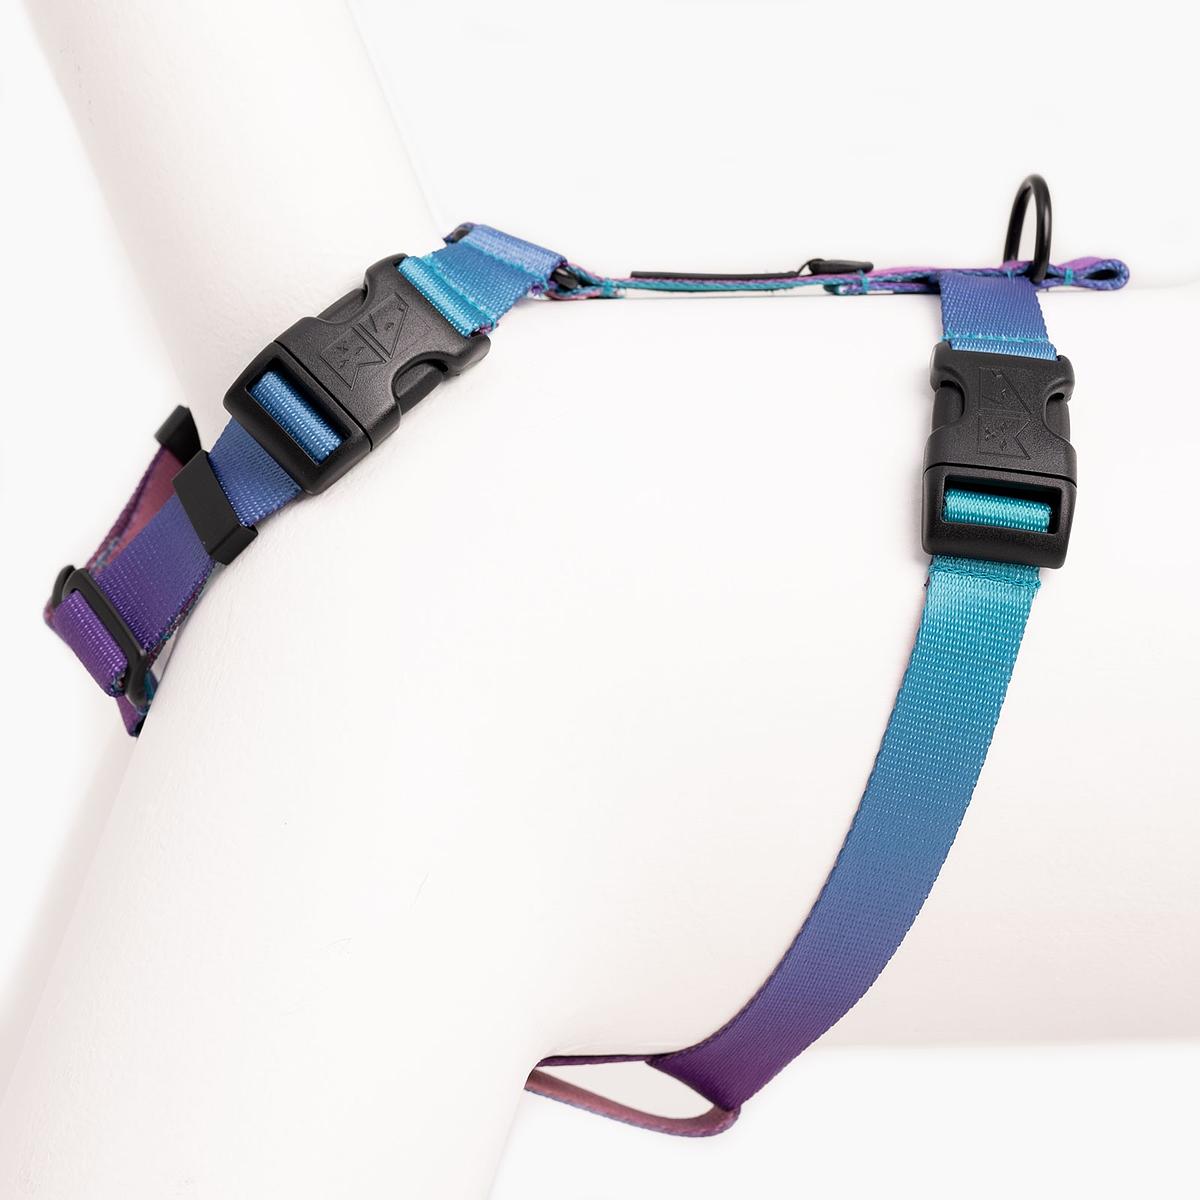 Stay-on guard harness "Under my ombrella" turqoise